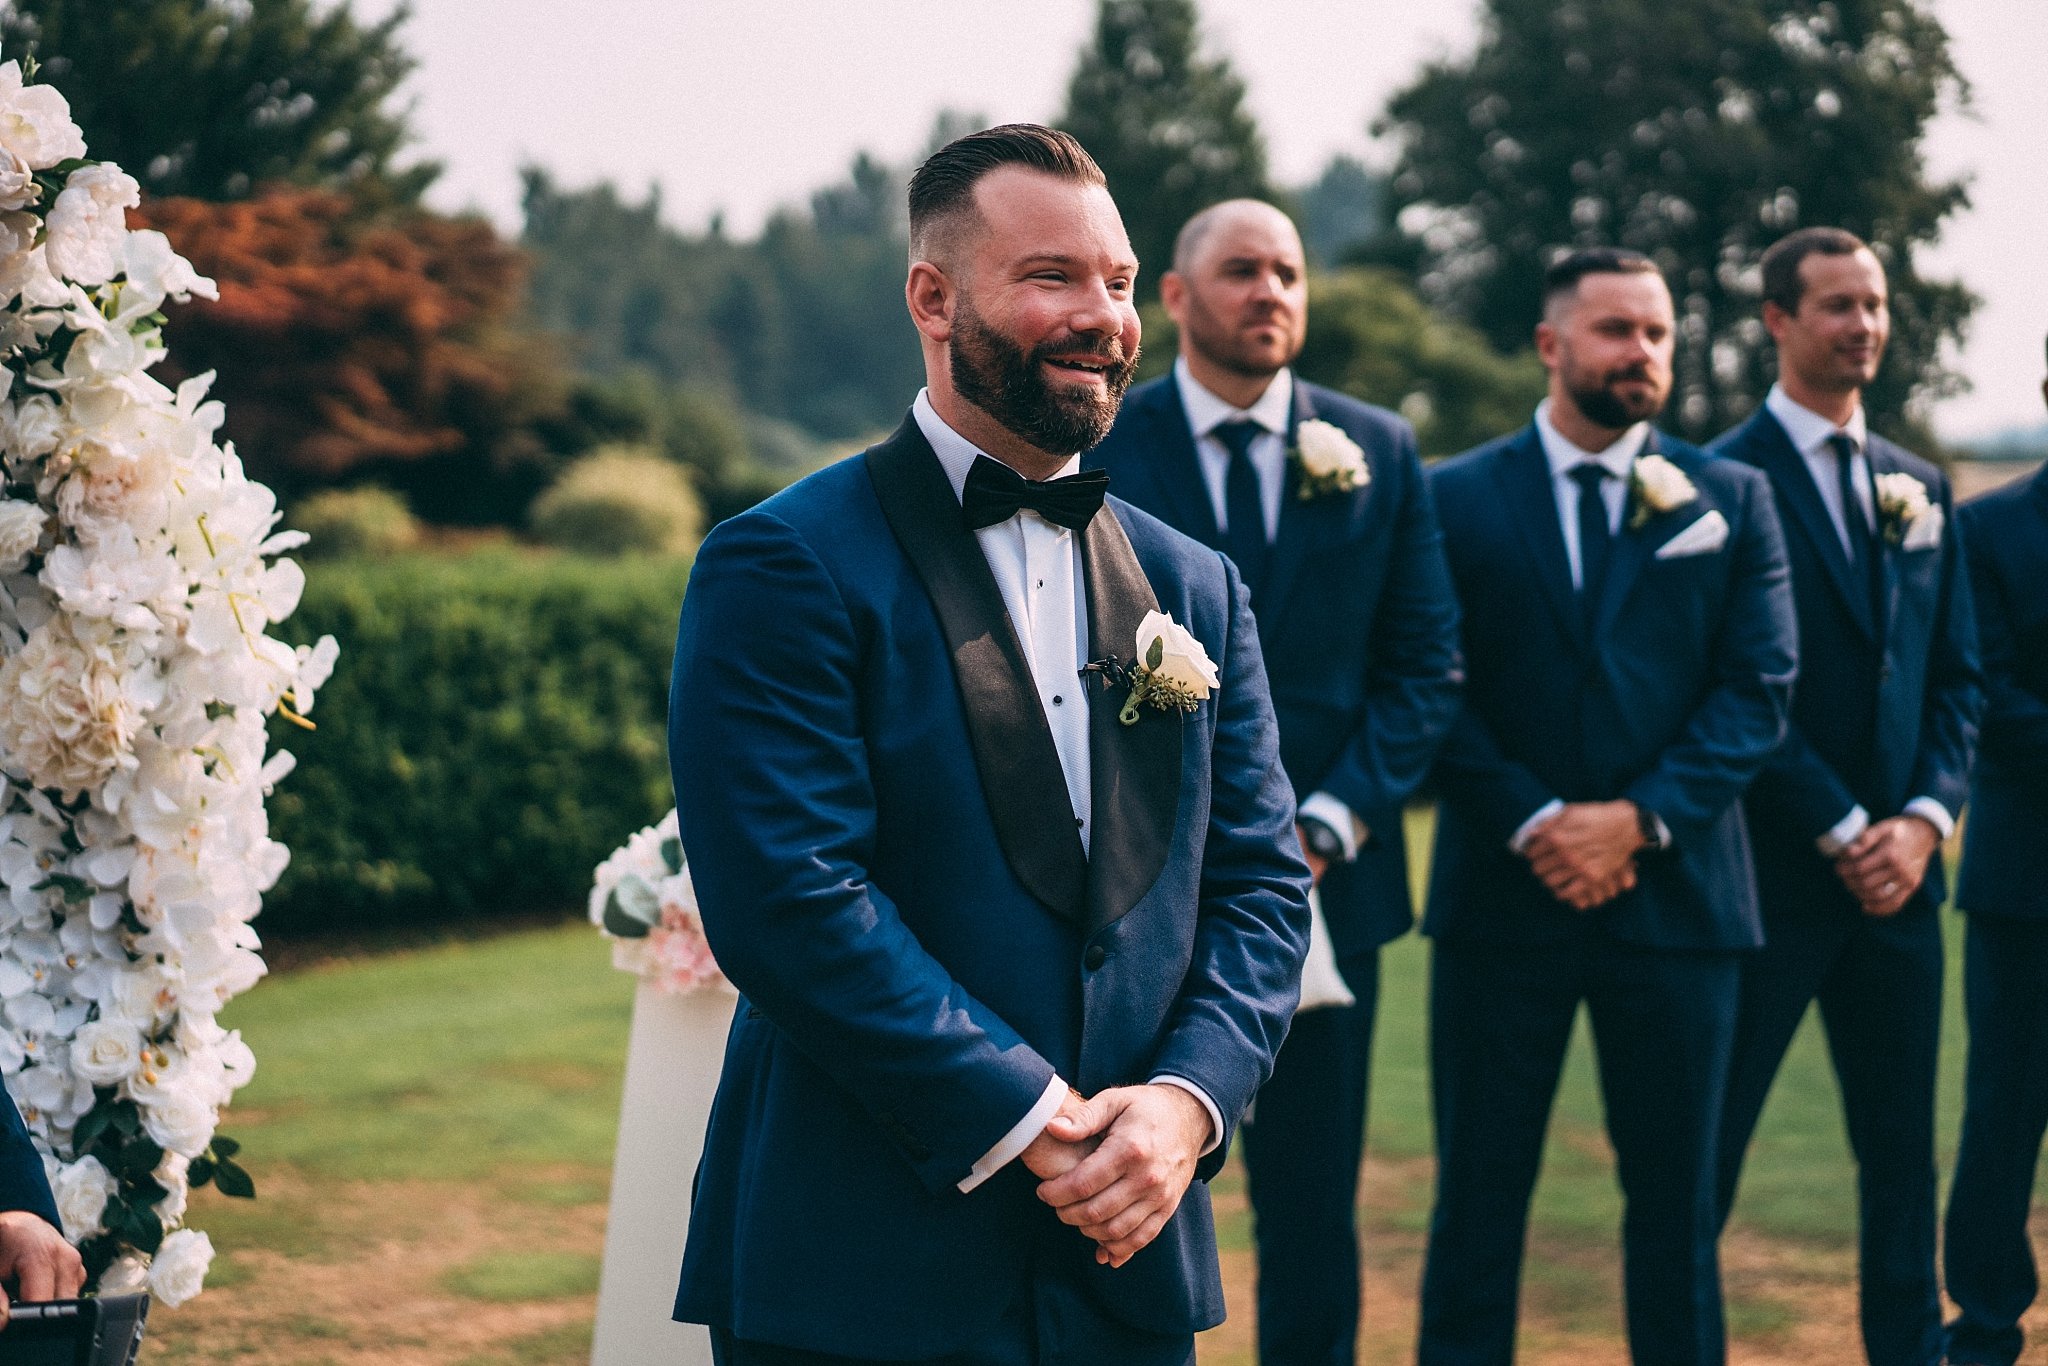 groom smiling at wedding ceremony
